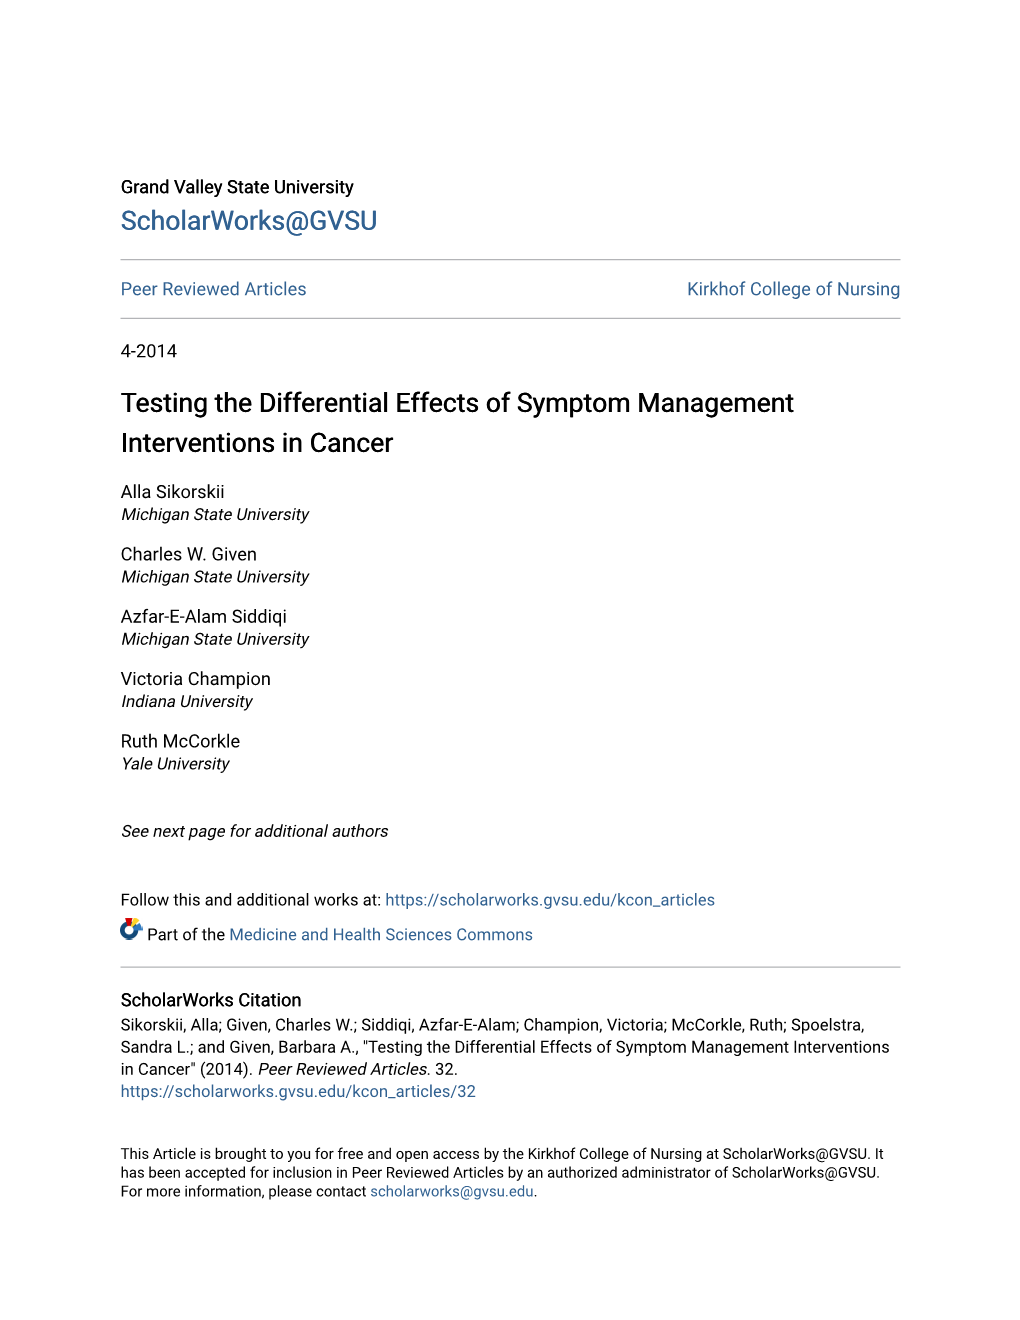 Testing the Differential Effects of Symptom Management Interventions in Cancer